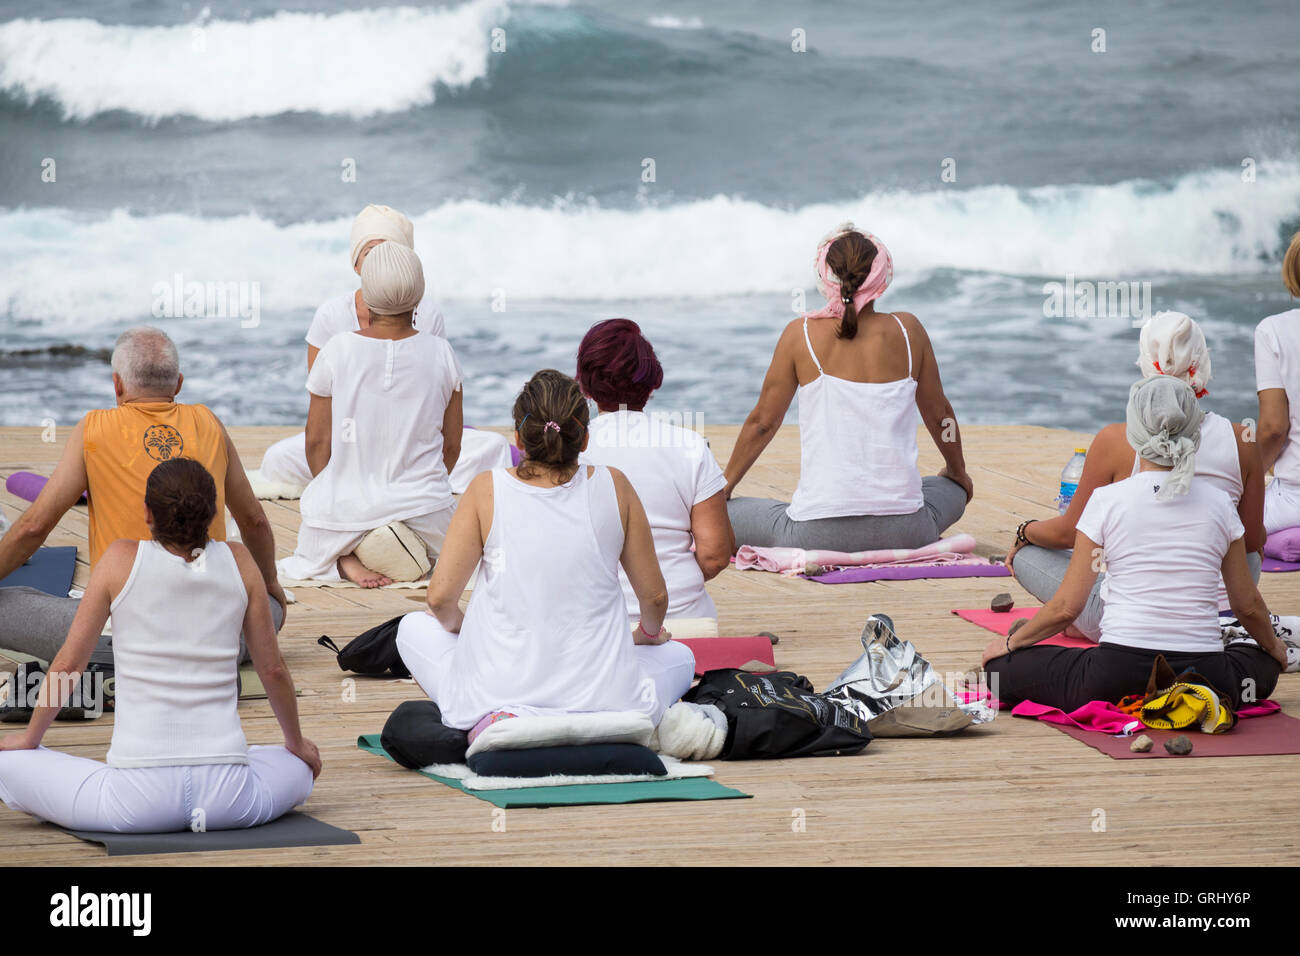 Yoga class on beach with ocean in background Stock Photo - Alamy